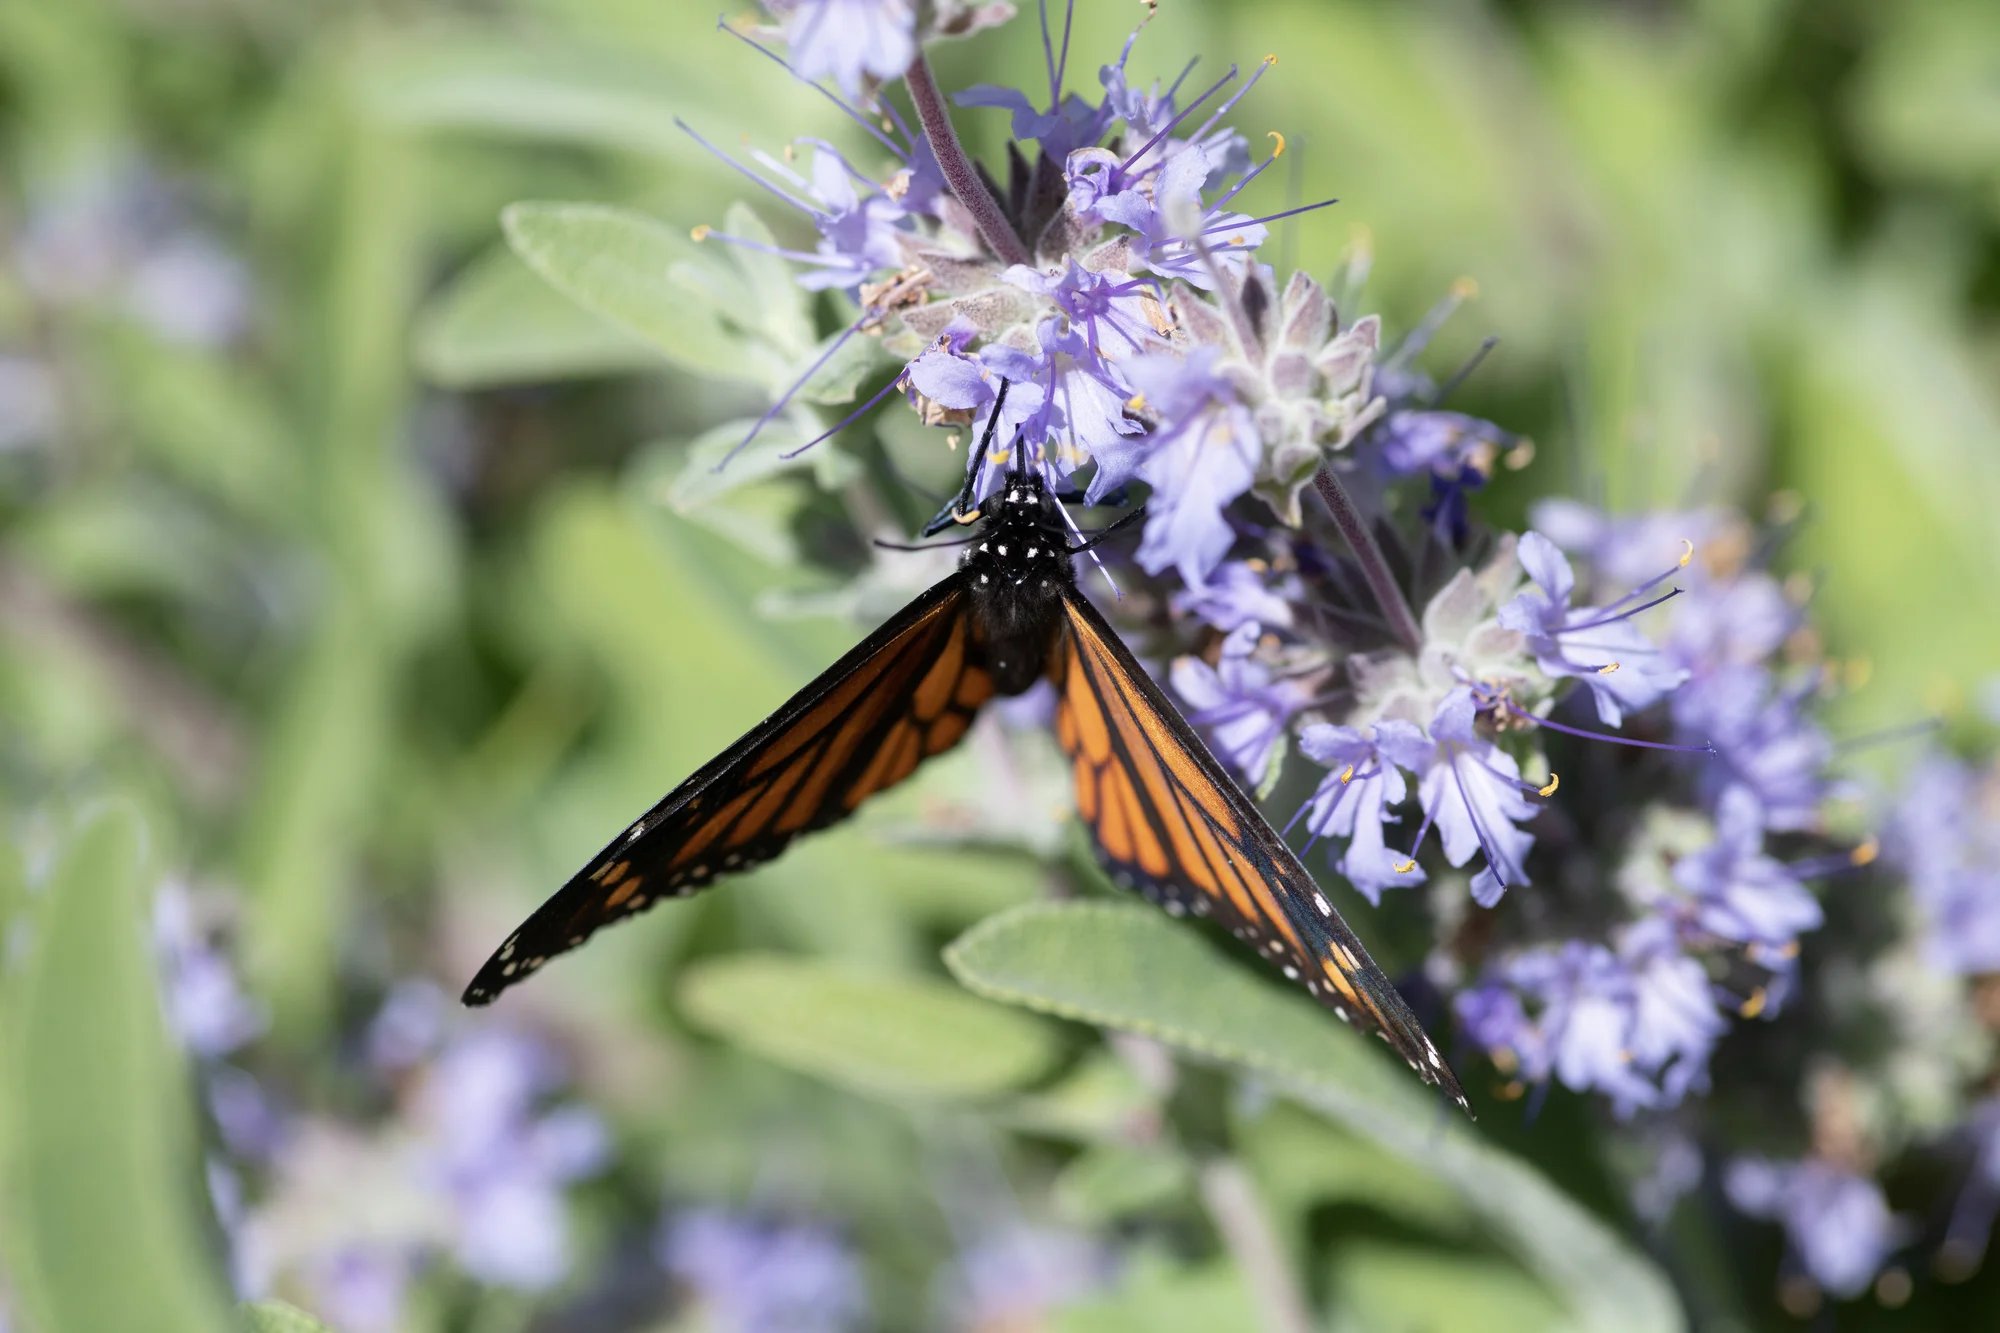 A black and orange butterfly sits upside down on a purple flower.